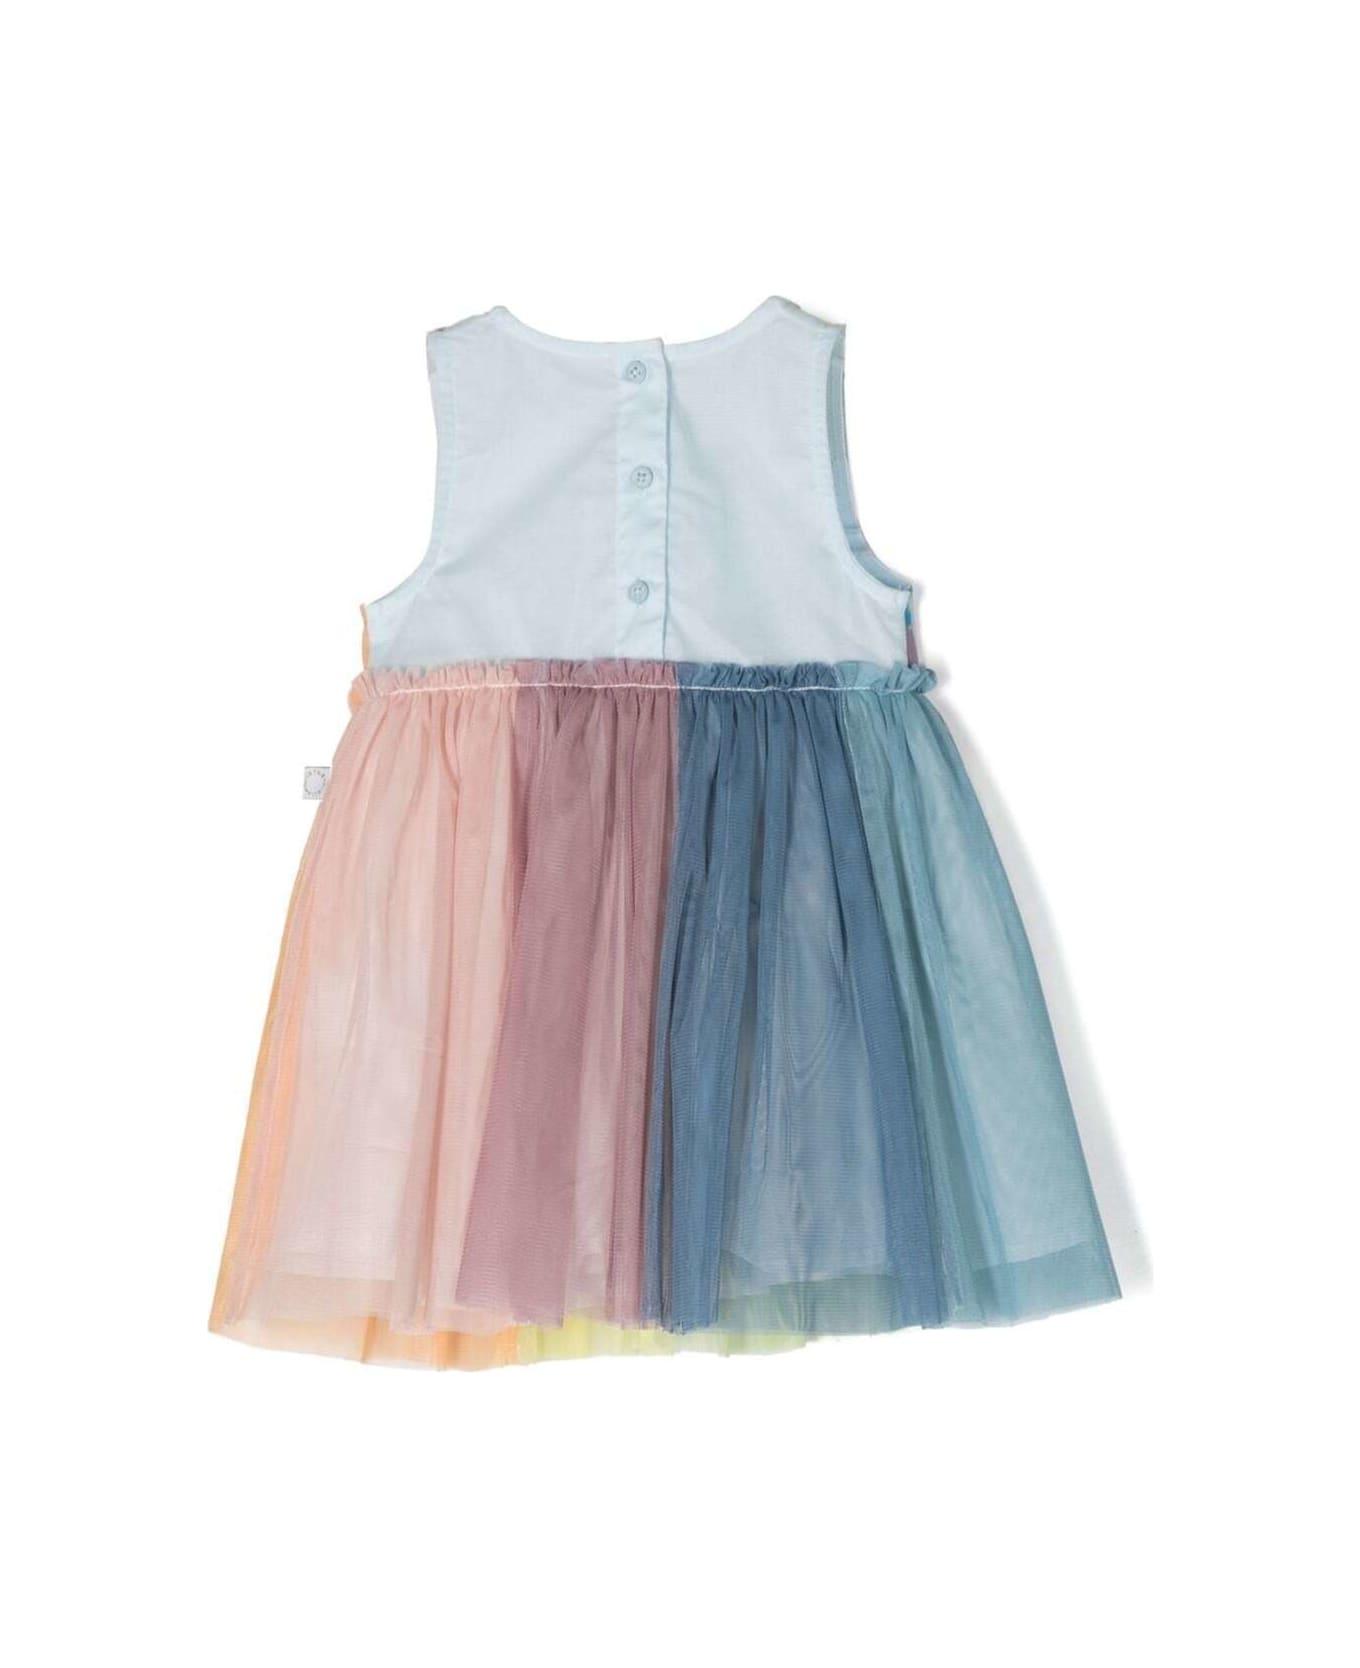 Stella McCartney Kids Rainbow-striped Dress With Tulle Overlay In Multicolored Cotton Baby - Multicolor